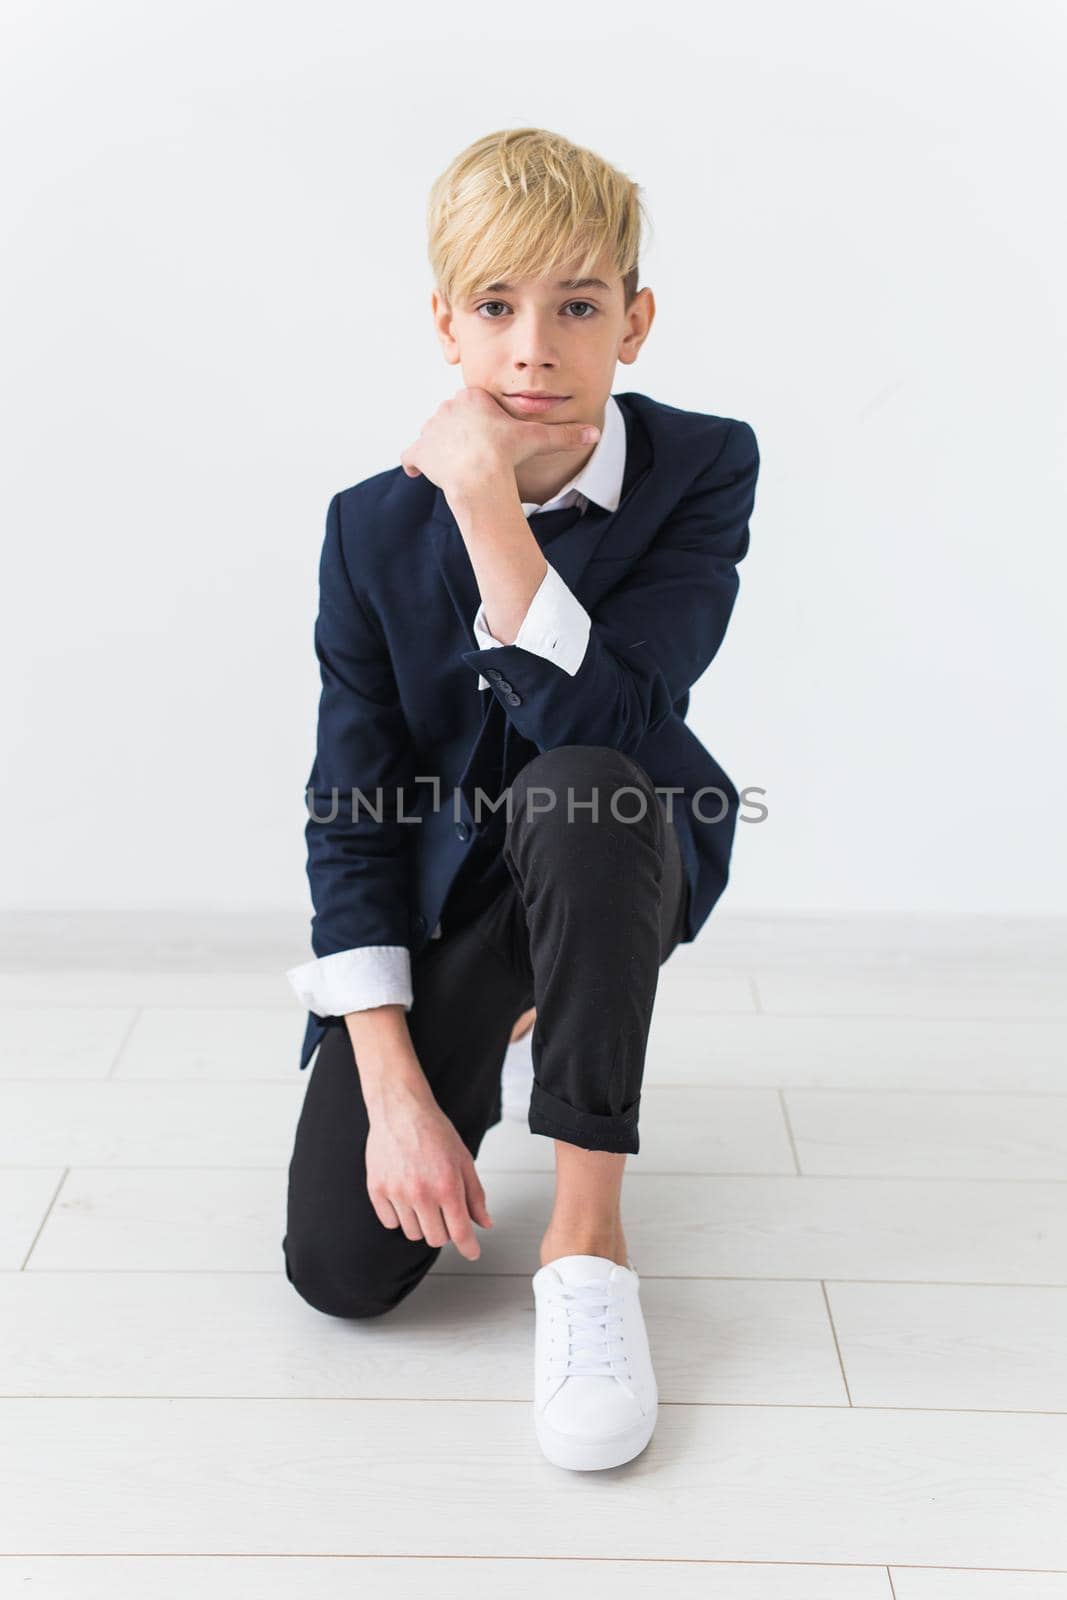 Puberty concept - Teenage boy portrait on a white background. by Satura86